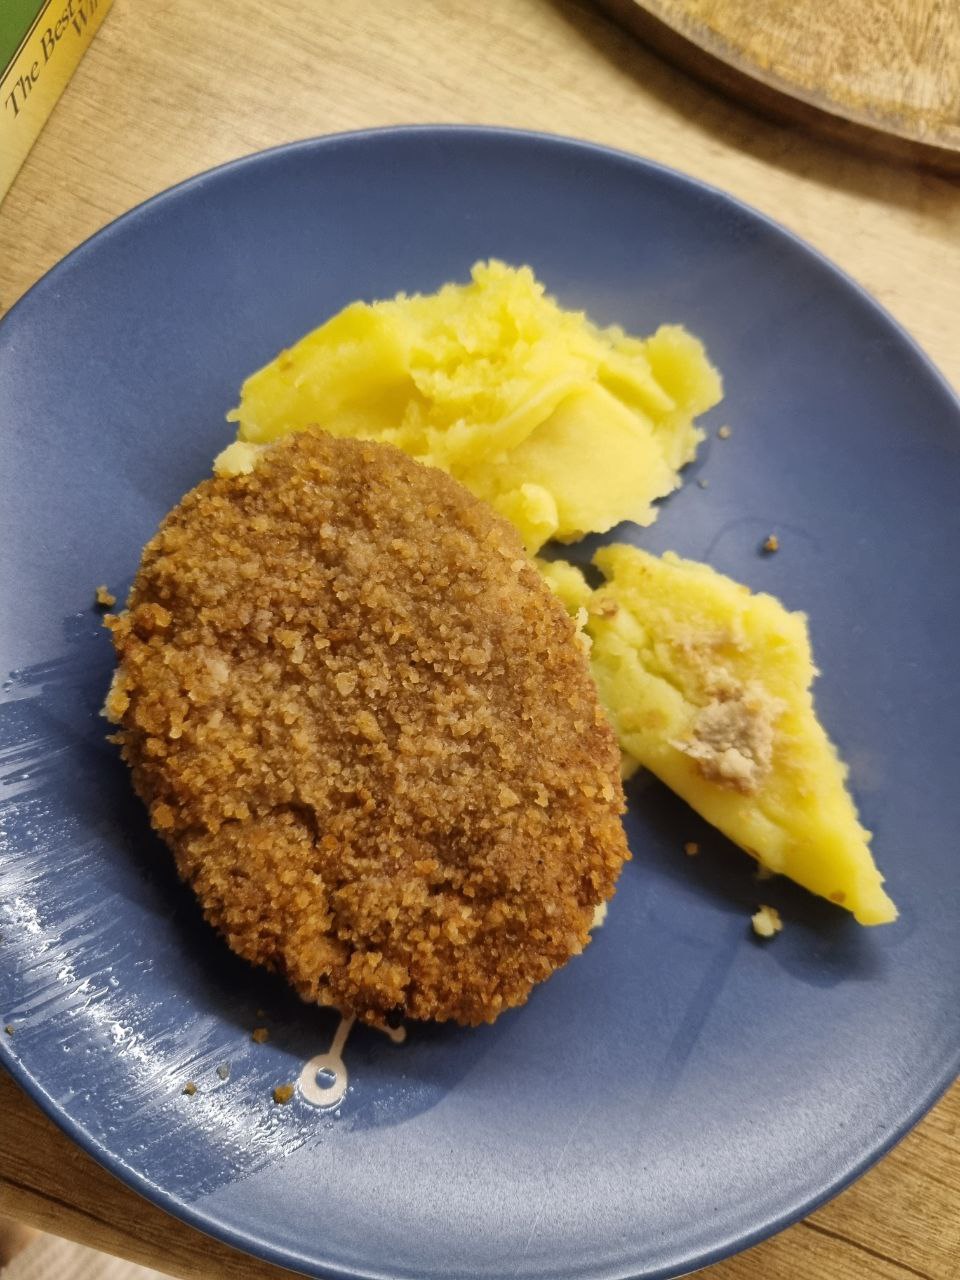 Breaded And Fried Cutlet With Mashed Potatoes